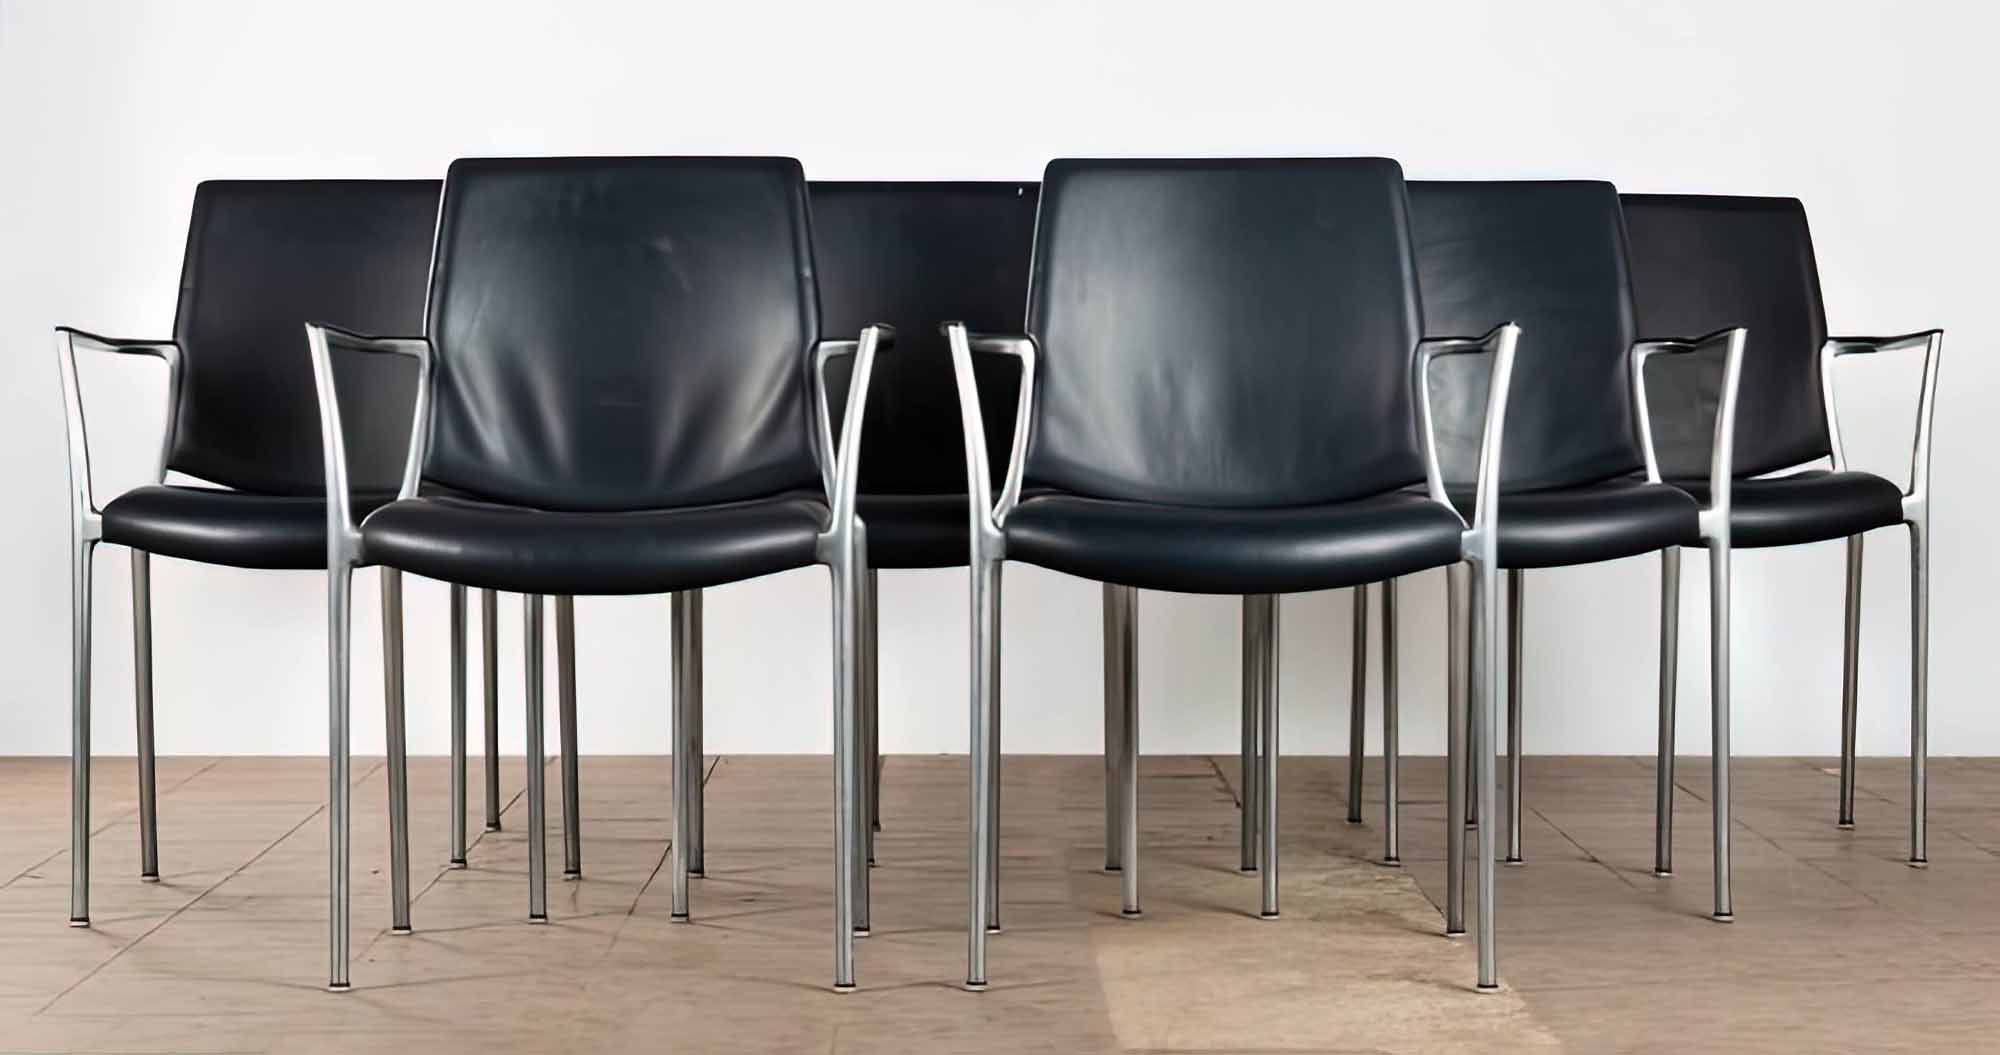 Refurbished Kusch & Co Office Chairs: A Smart Choice